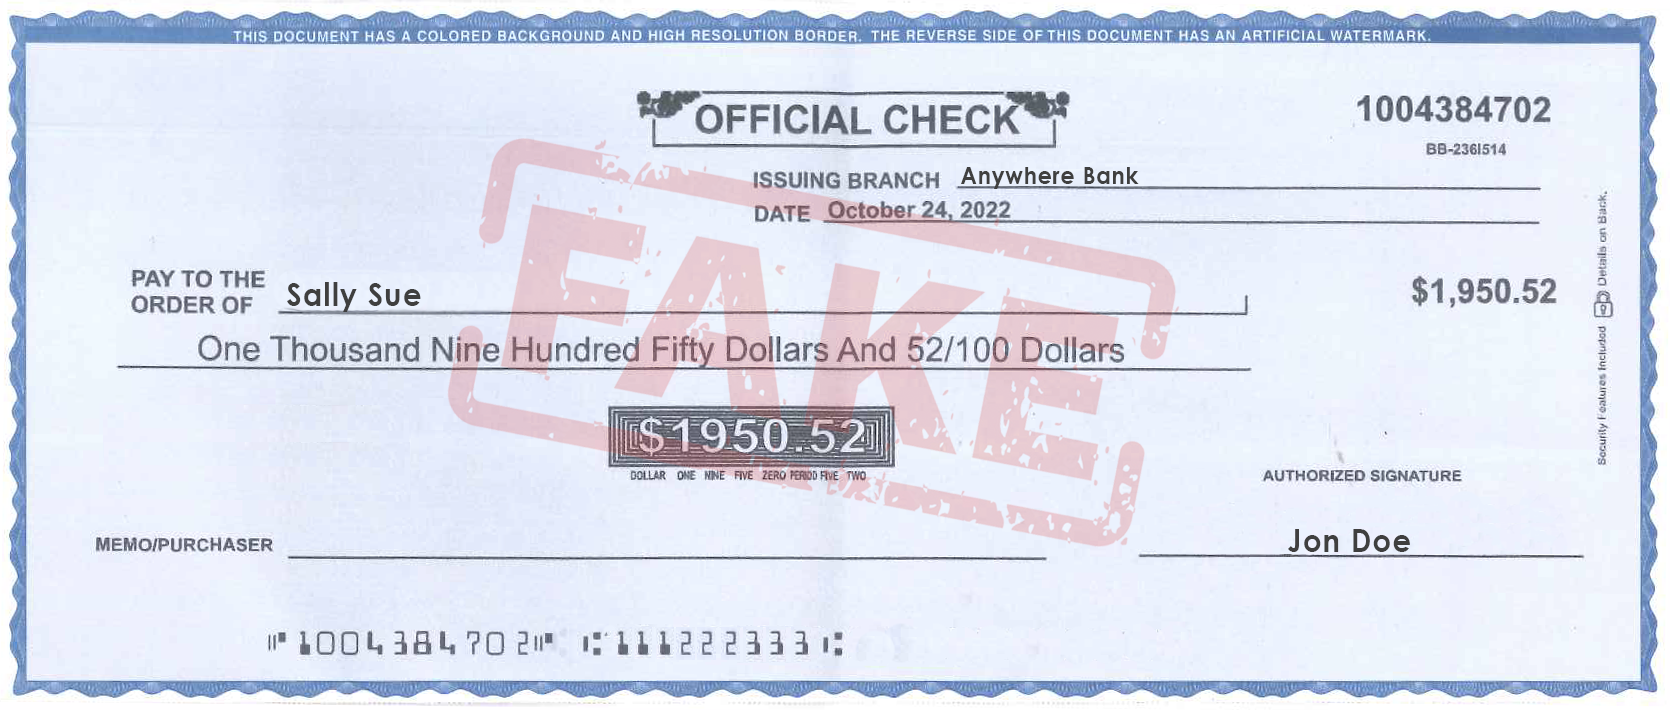 fraudulent check example image